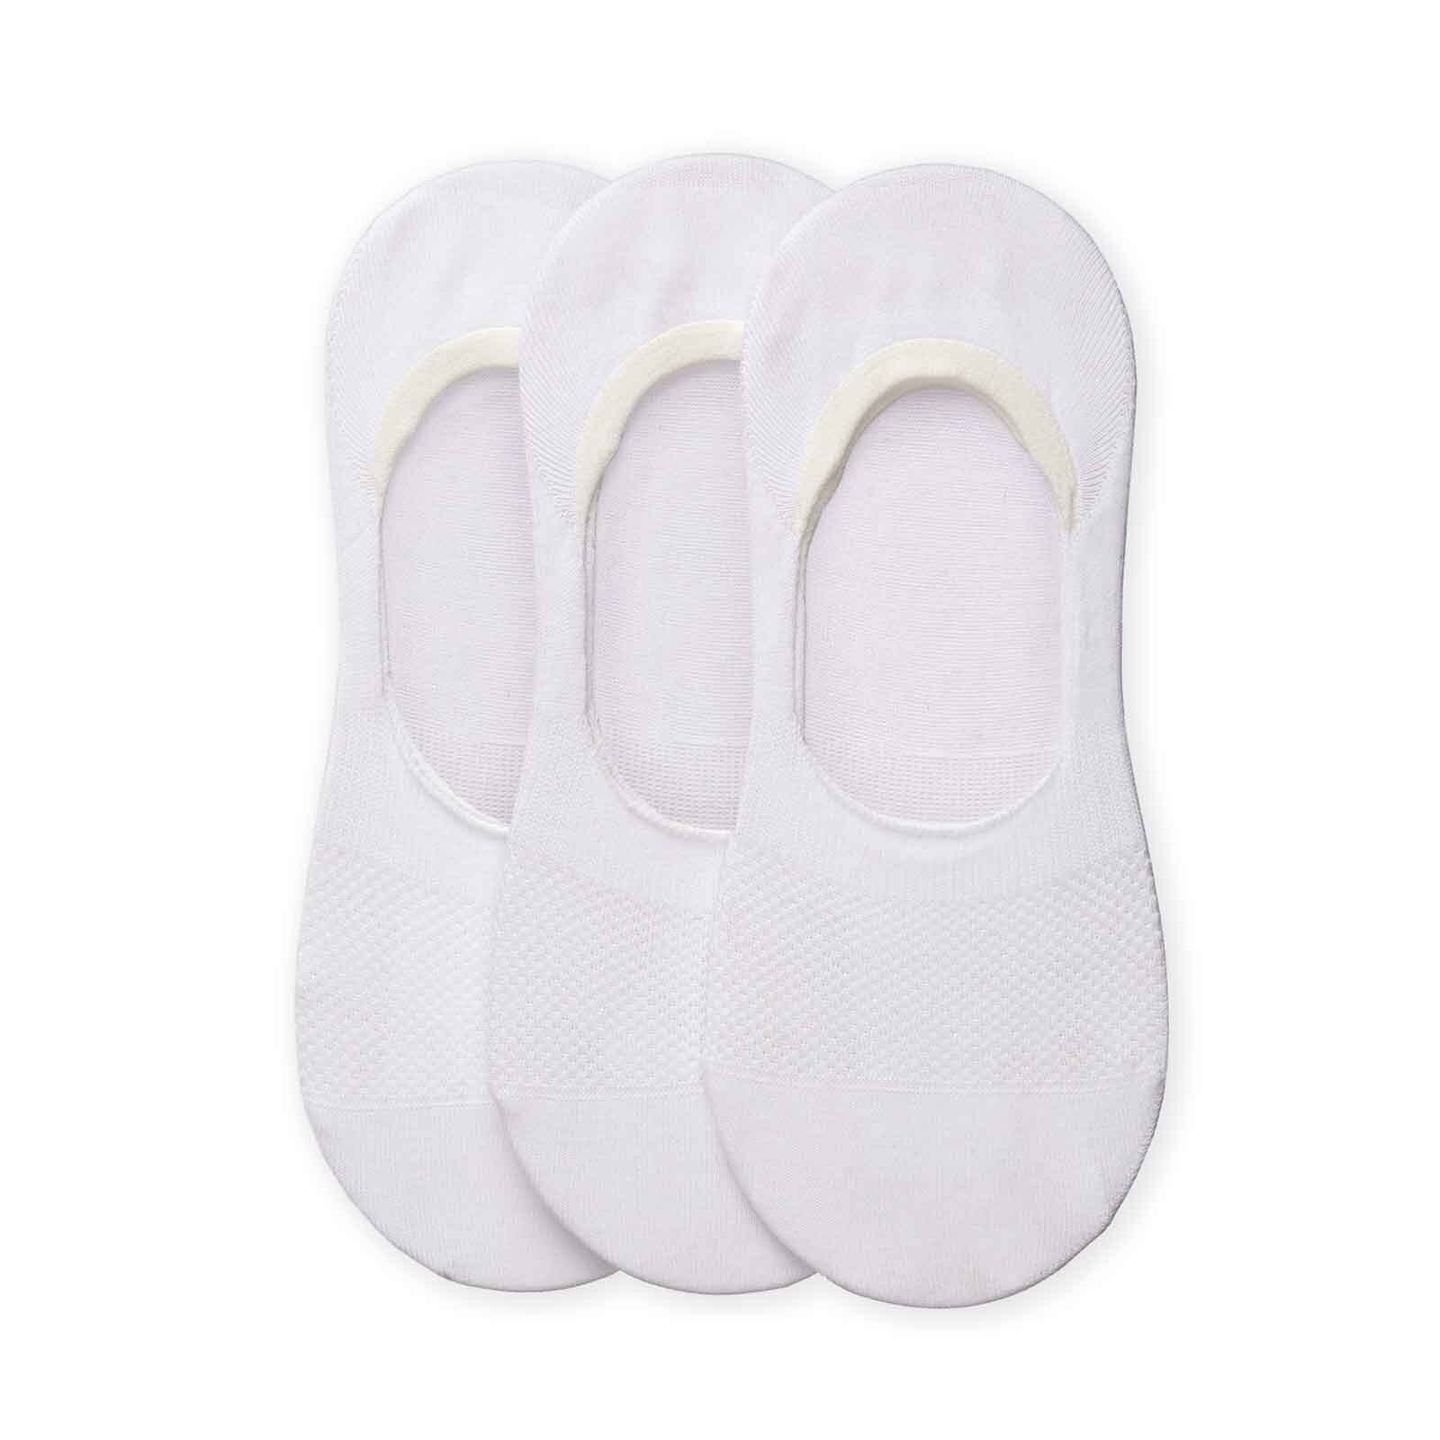 Simply Invisible Socks, Cotton White, 3 Pairs